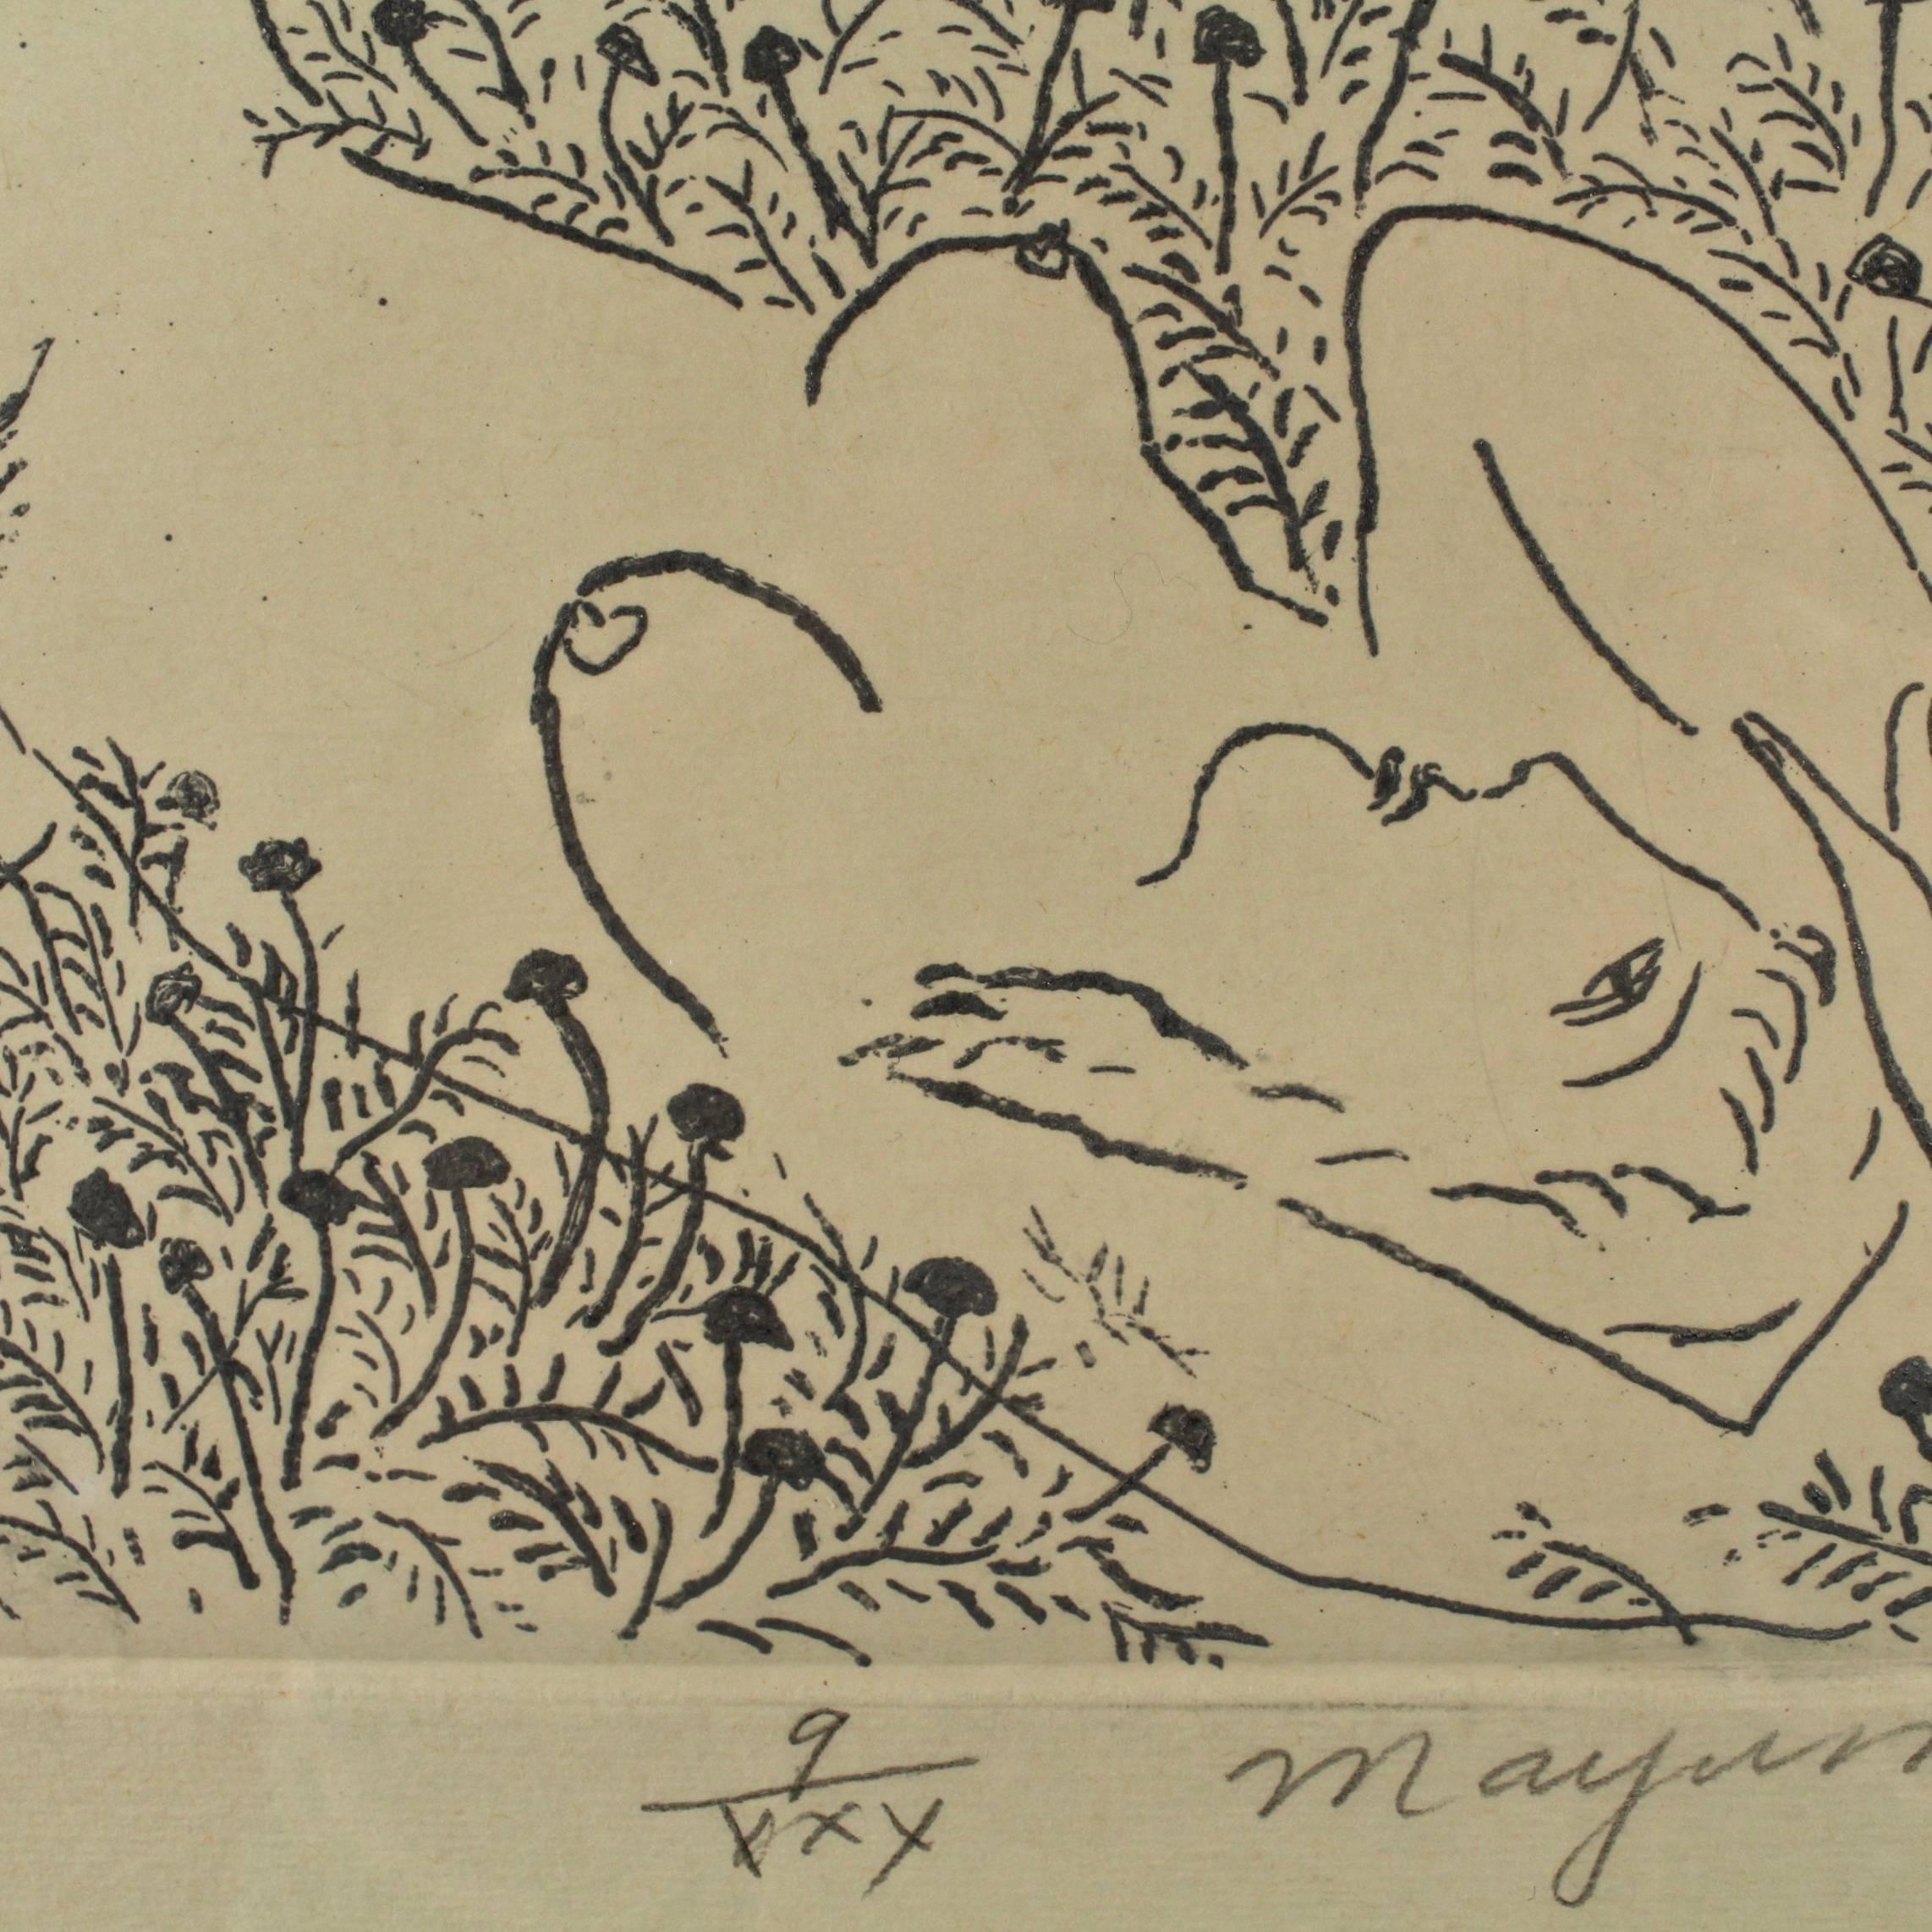 American Chamomile, a Modern Etching of a Nude Female in a Field of Flowers by Mayumi Oda